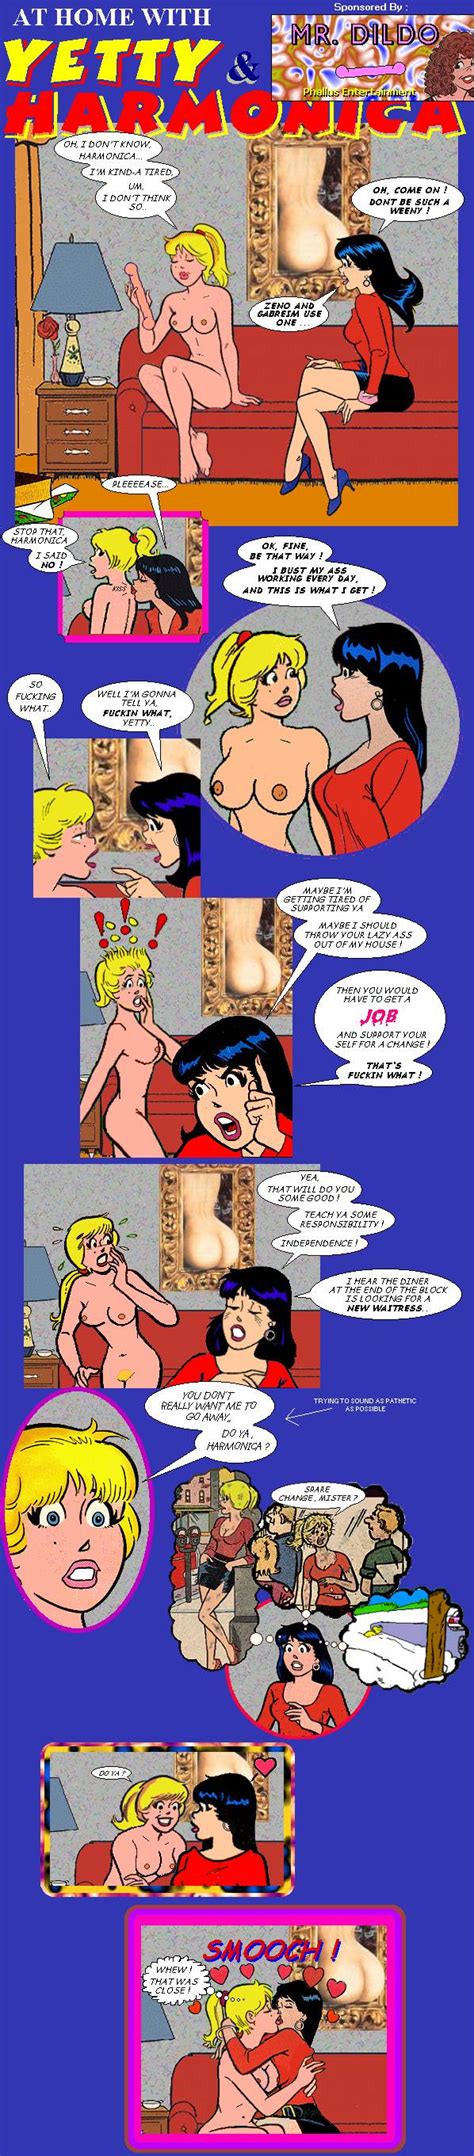 Rule Girls Archie Comics Ass Betty And Veronica Betty Cooper